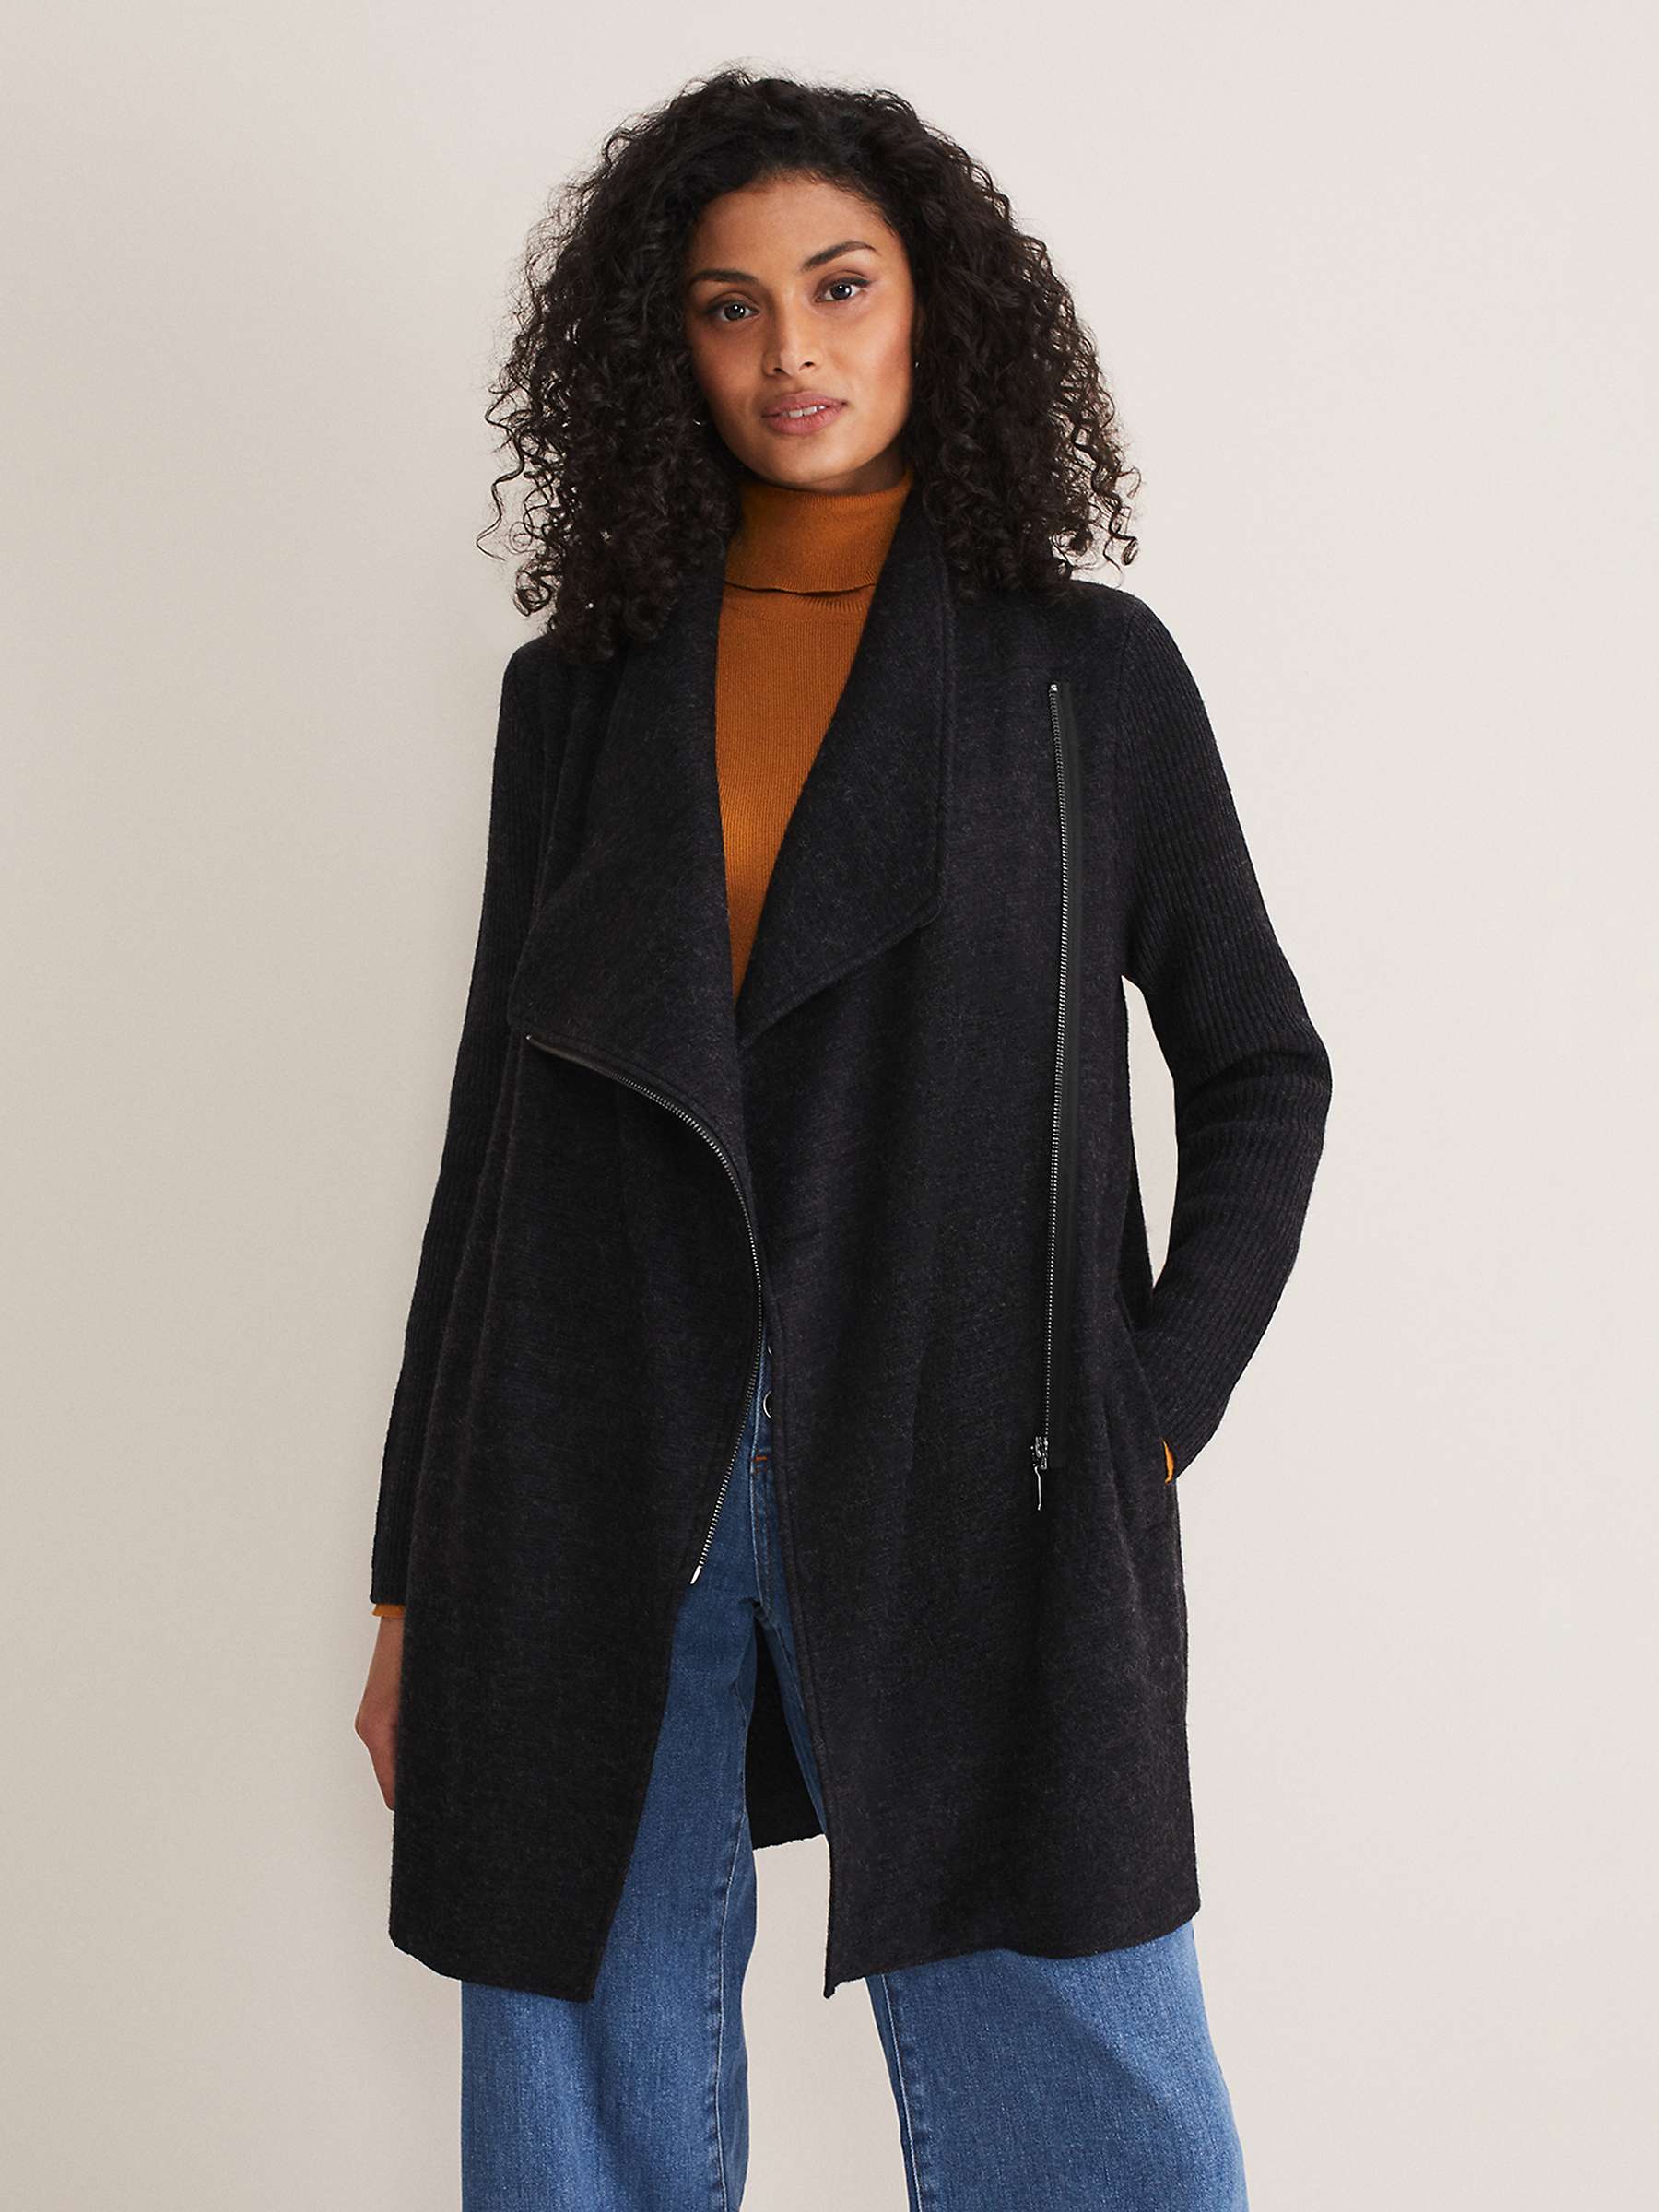 Buy Phase Eight Byanca Zip Up Knit Coat Online at johnlewis.com